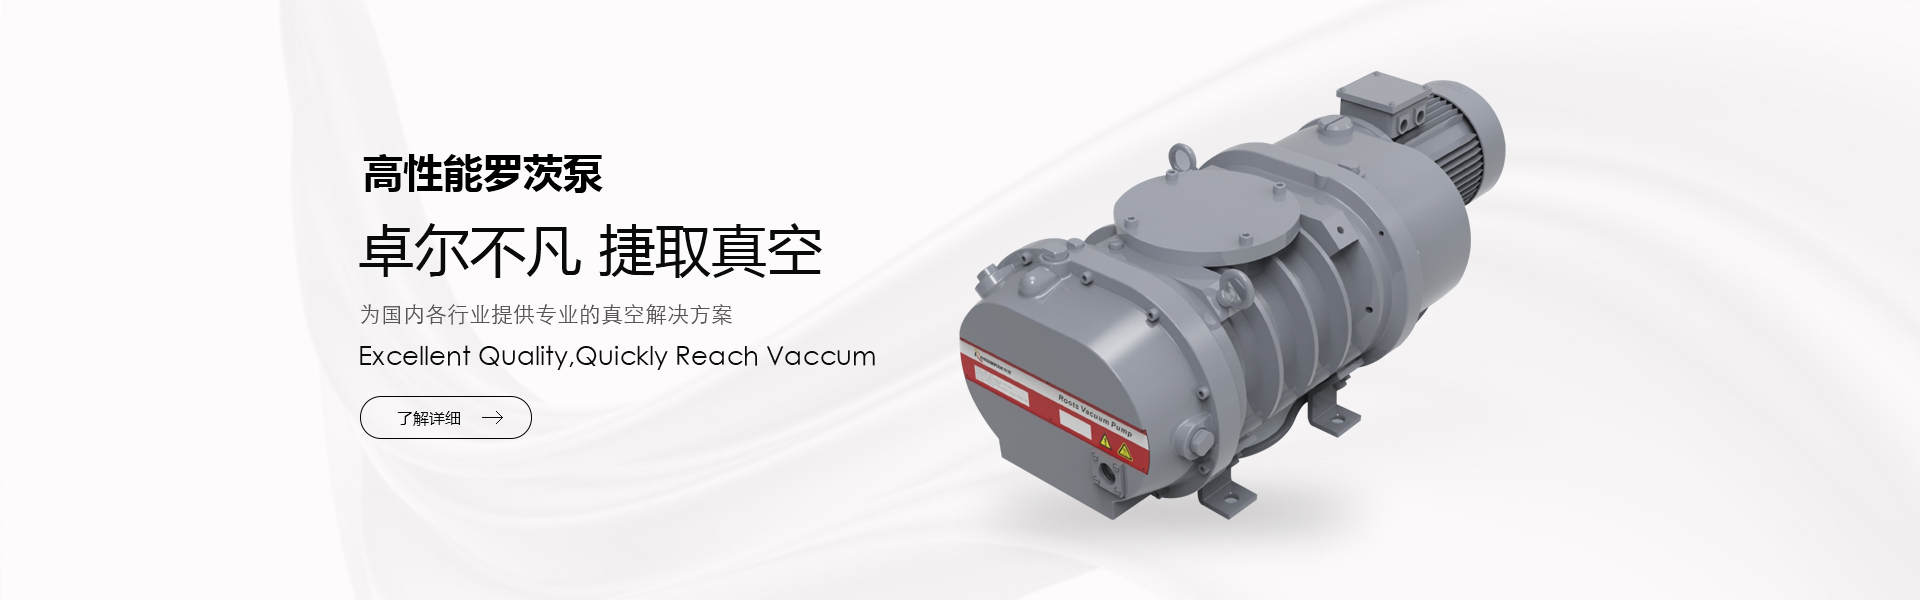 Wholesale Roots vacuum pump in china